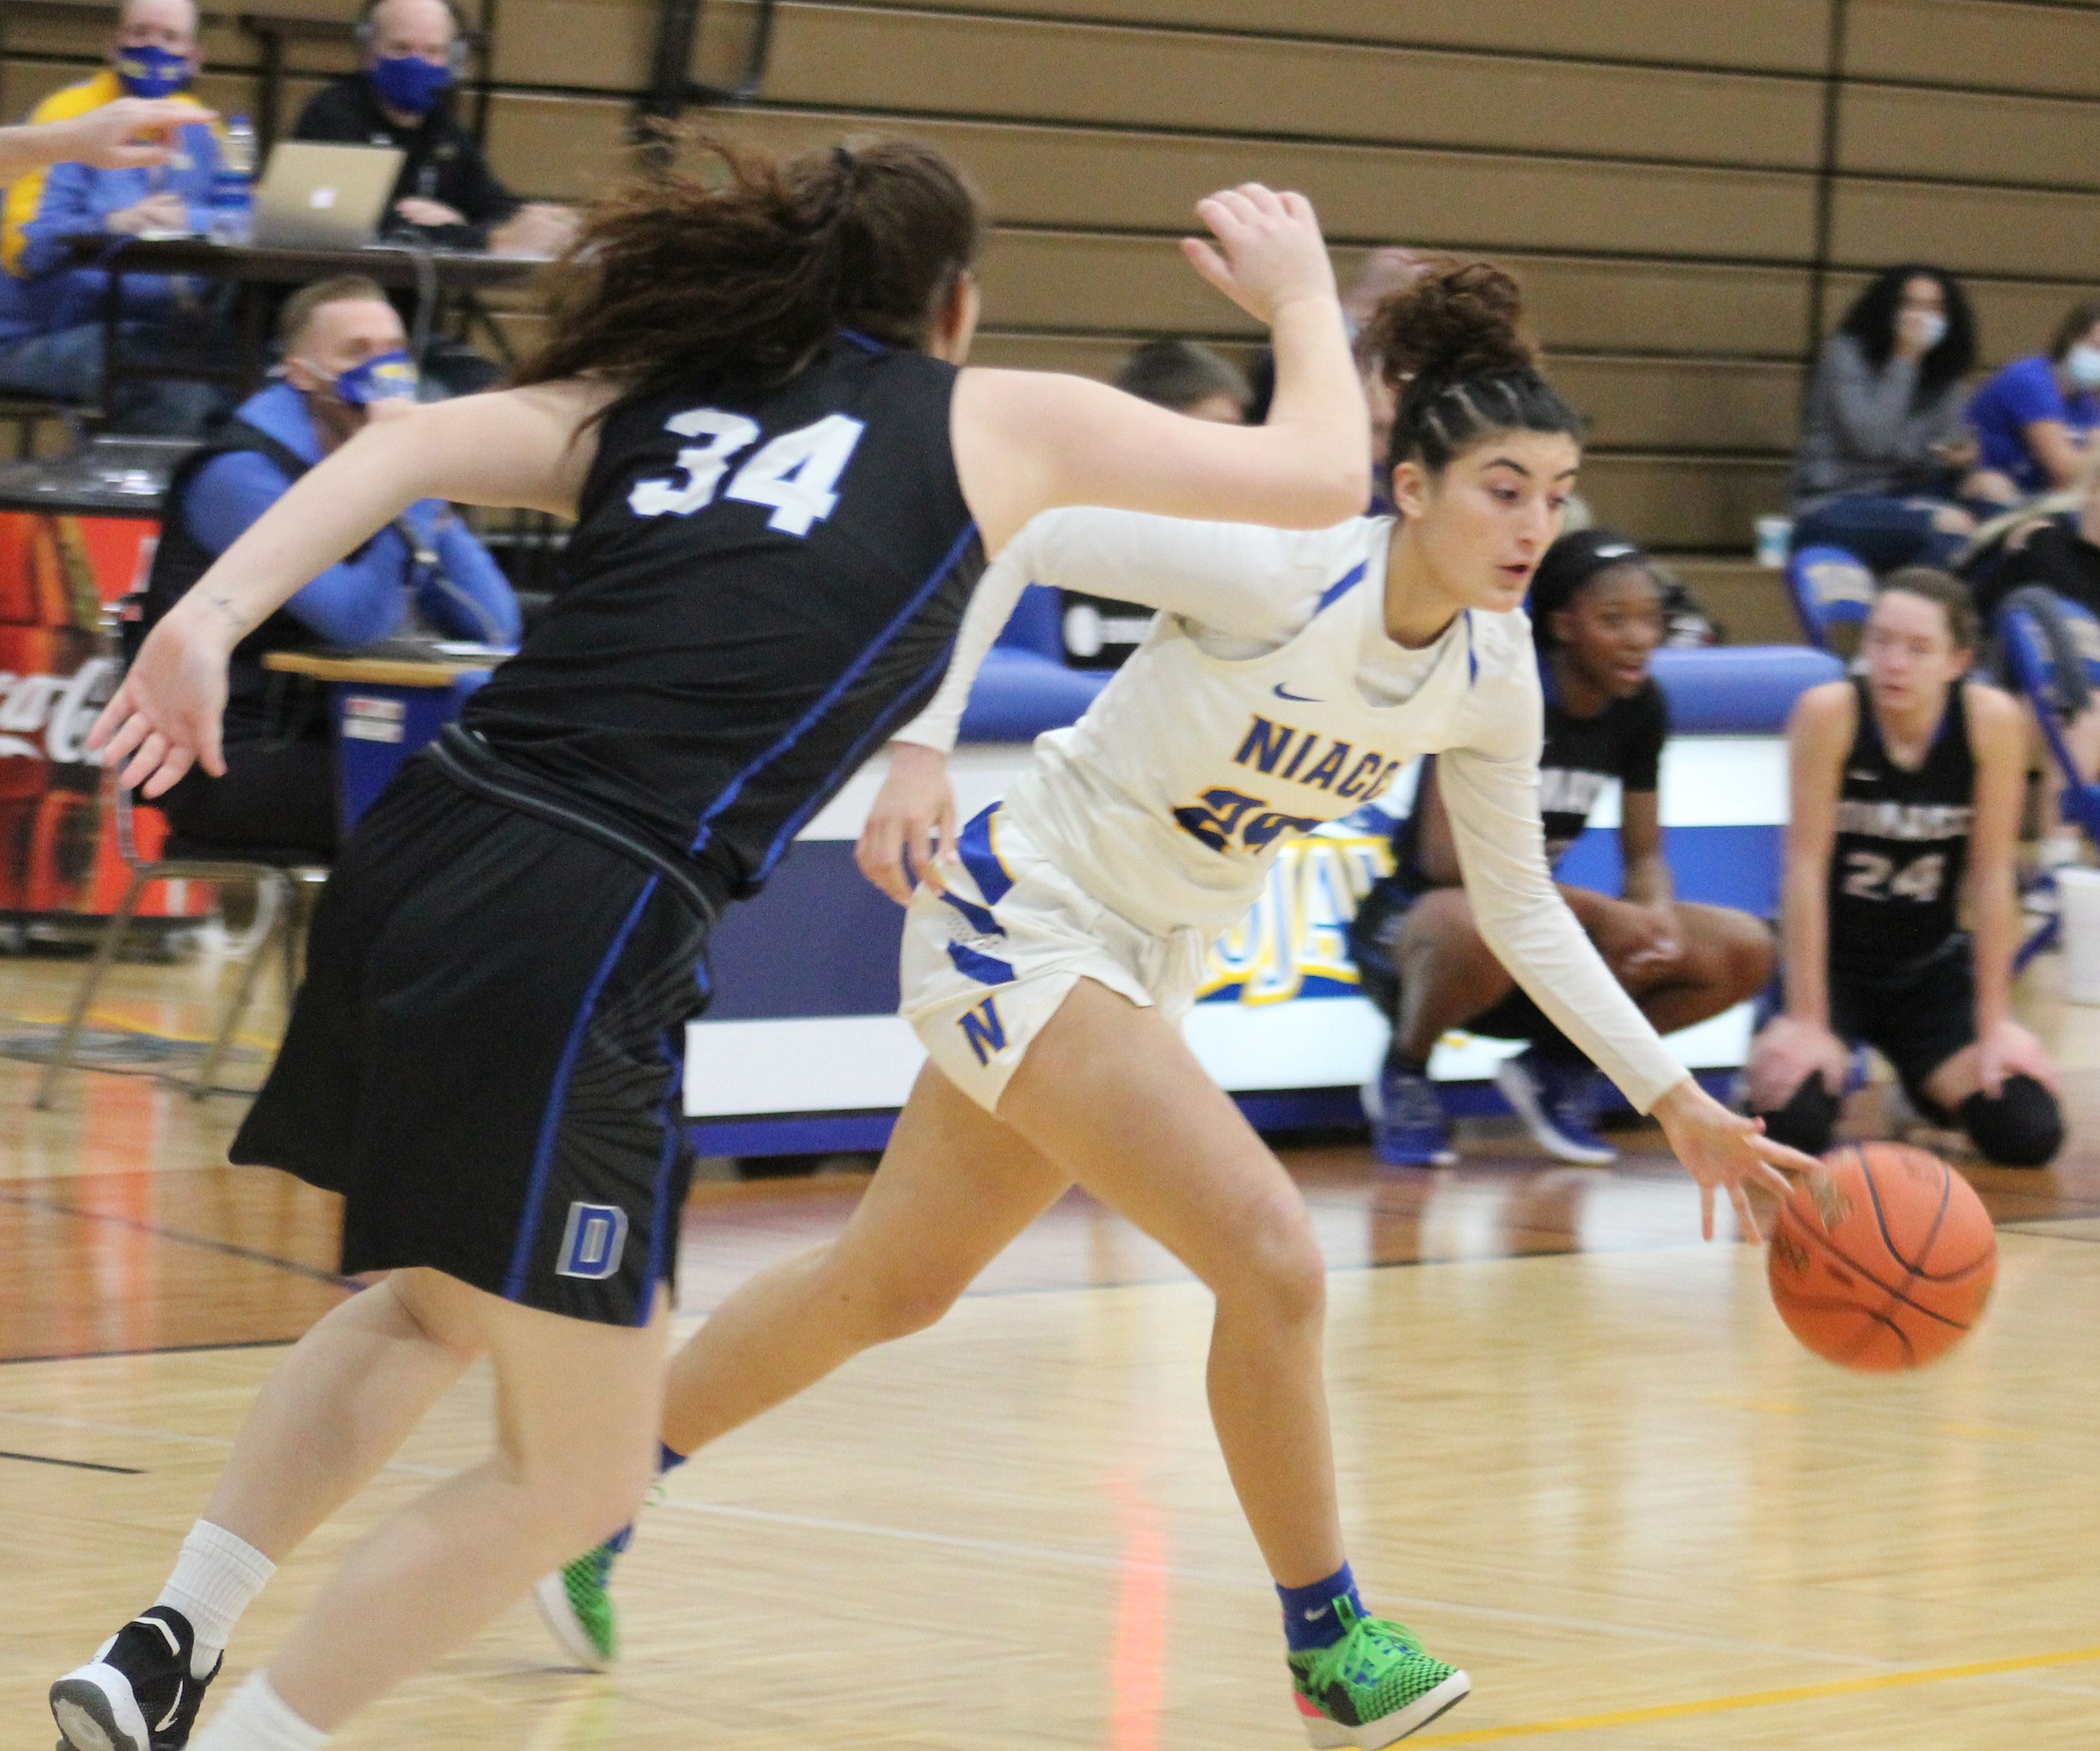 NIACC's Czarina Mada drives to the basket in Saturday's game against DMACC.